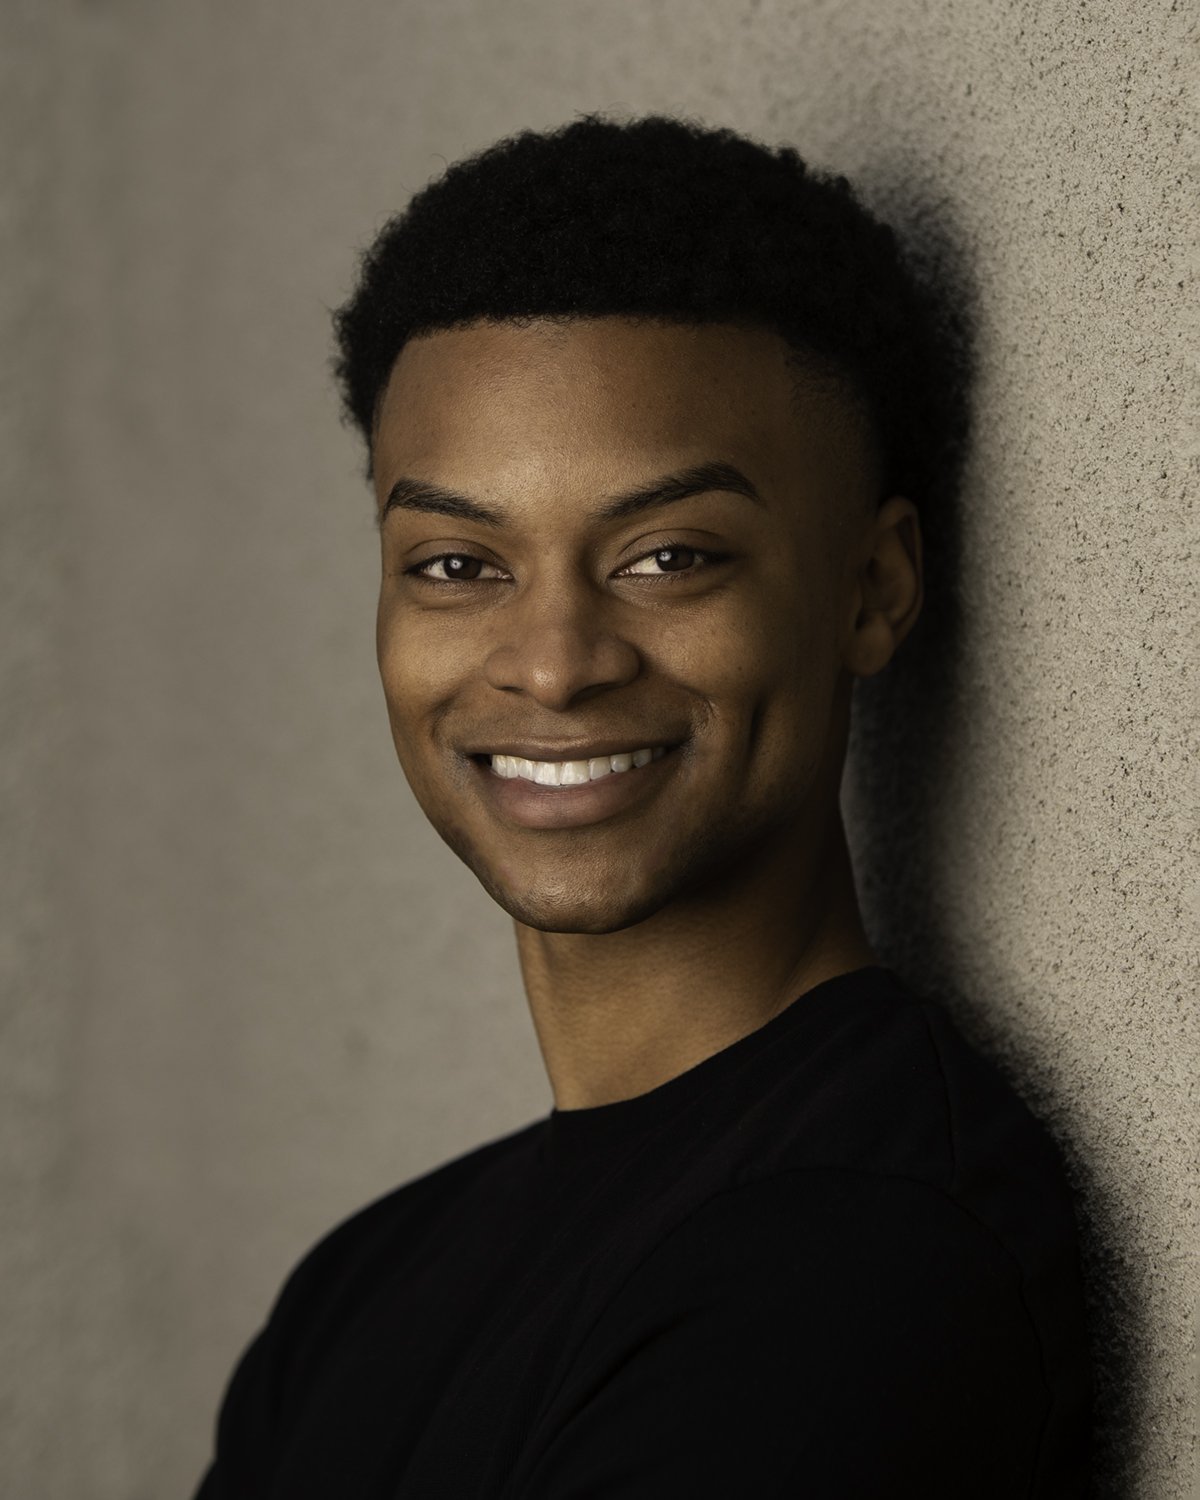  Congratulations to Tre Boyd who booked a GREAT ROLE!!  Hard work pays off!  Way to go Tre!! 